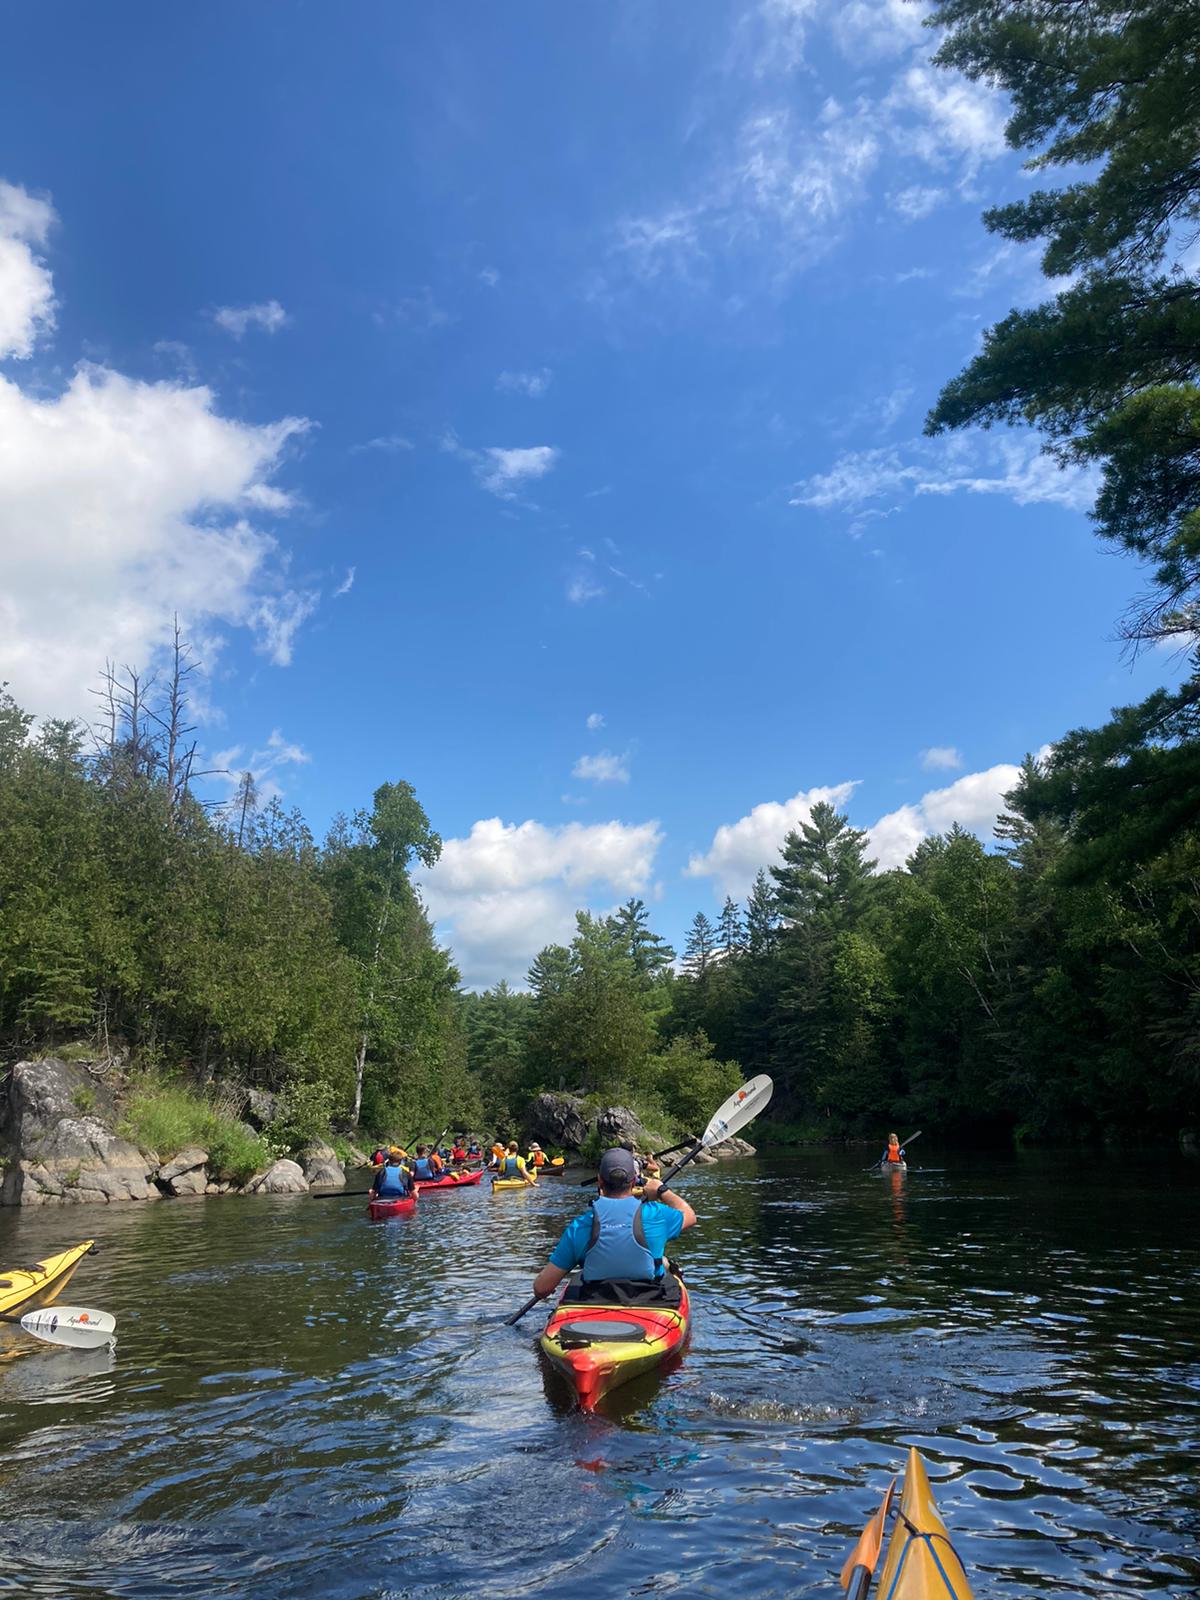 TYPE 3 AT: KAYAKING – CANADA AUGUST 2022 (OUOTC)